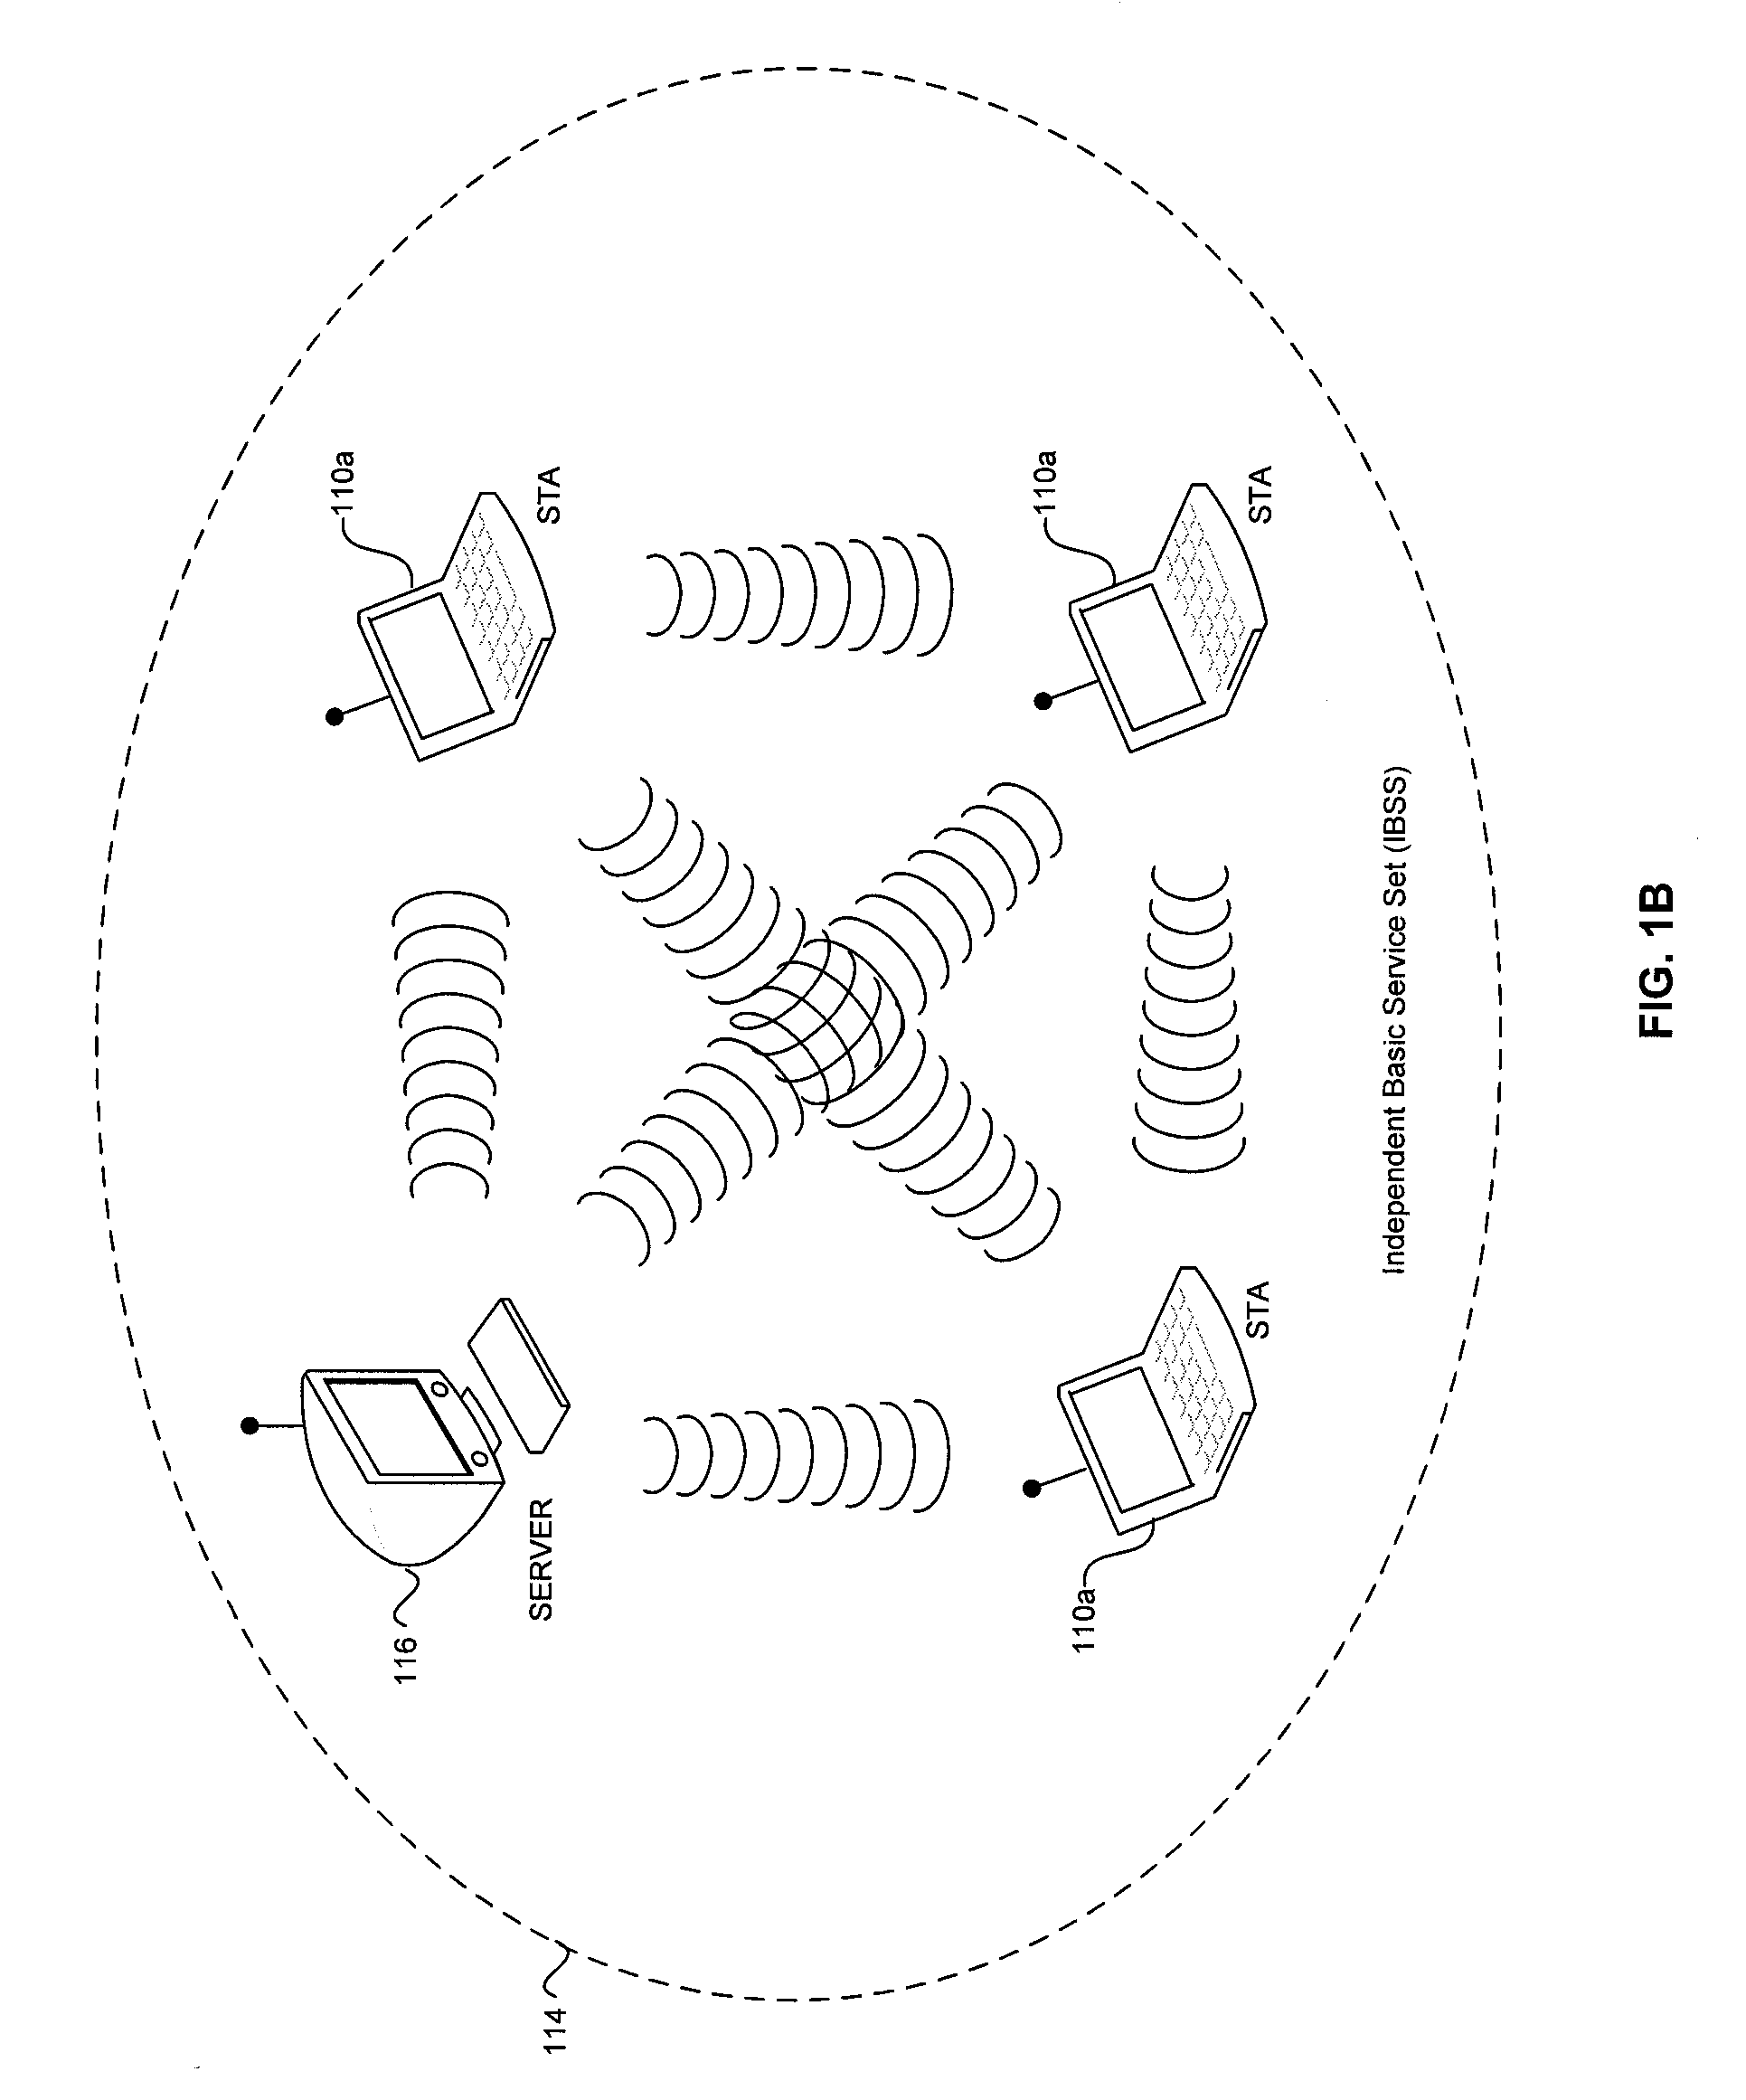 Method and system for redundancy-based decoding of video content in a wireless system